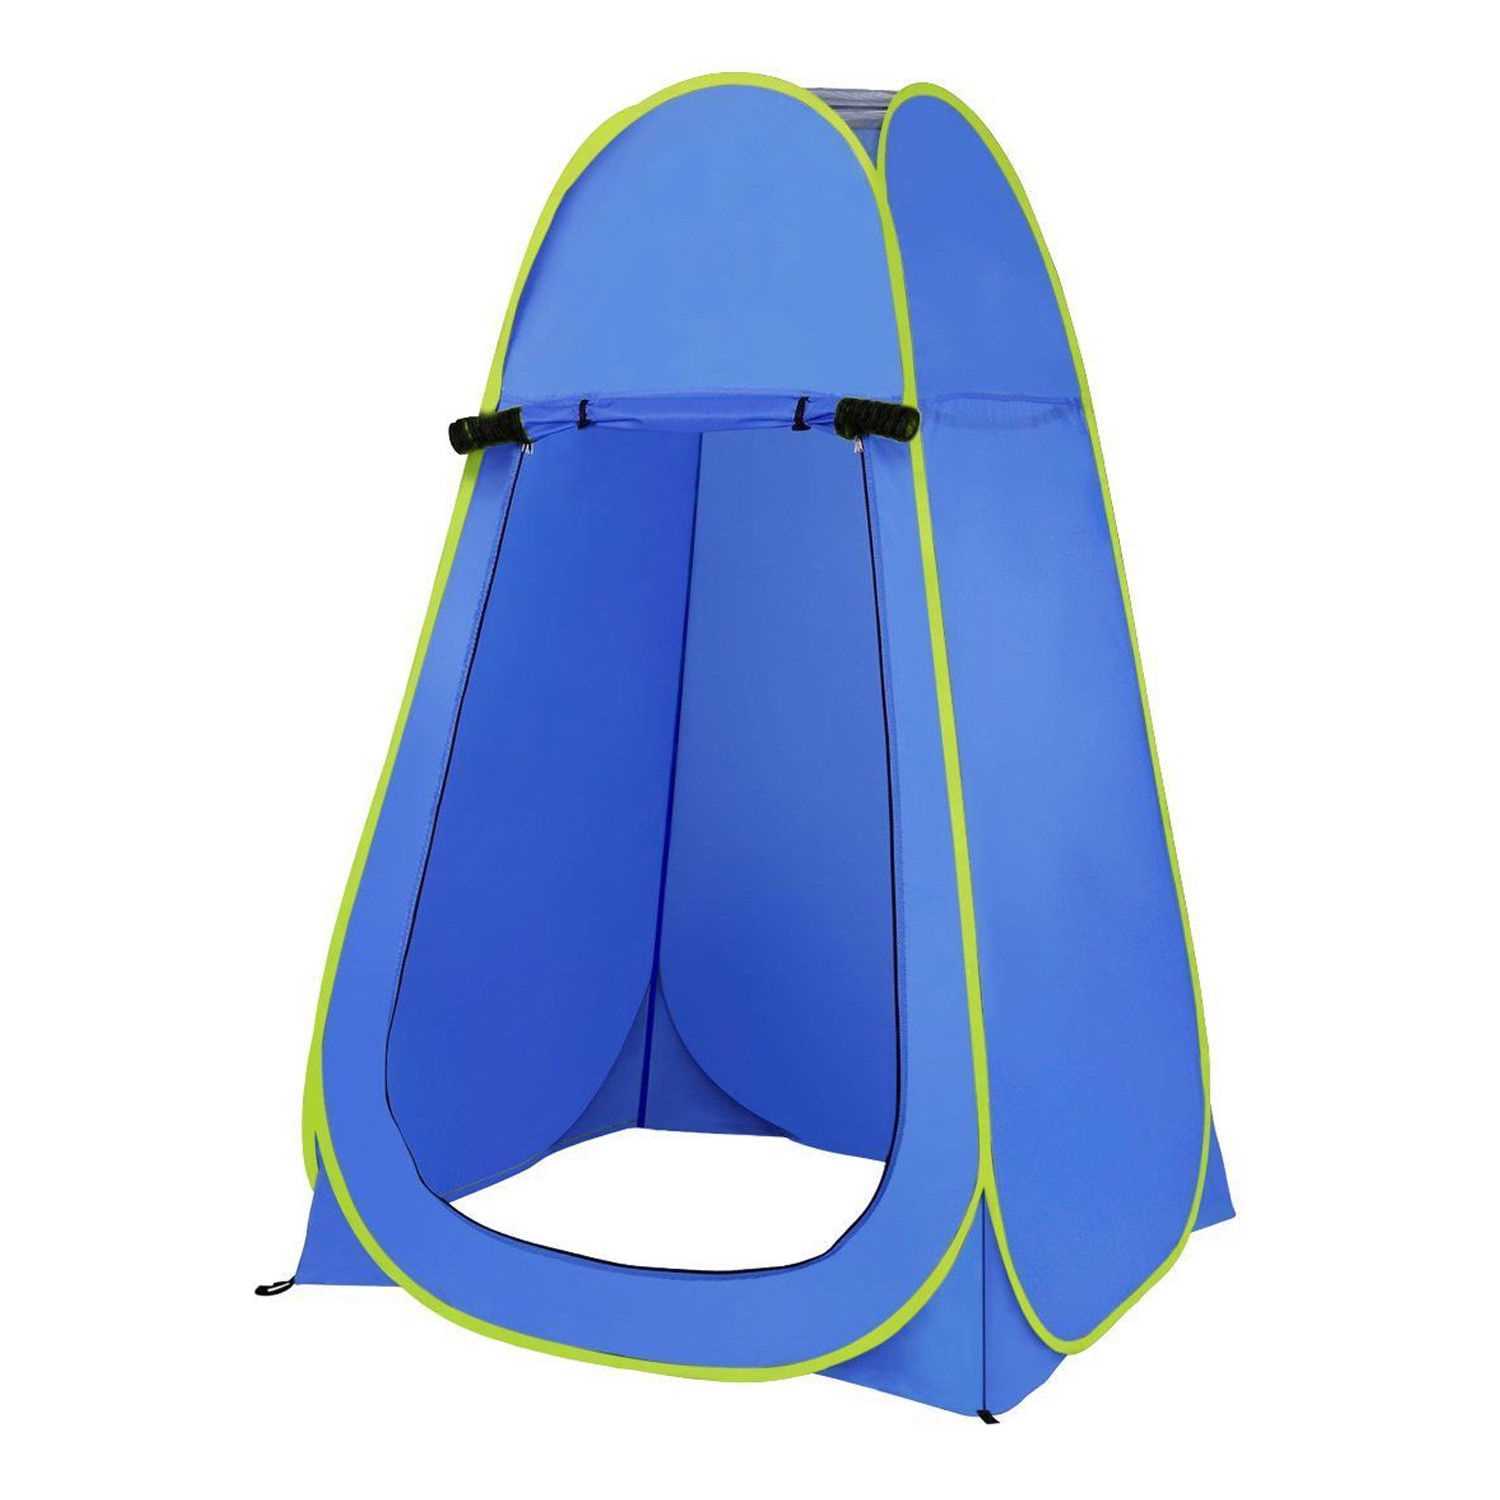 Blue Outdoor Portable Instant Pop Up Tent Camping Shower Toilet Privacy Changing Room